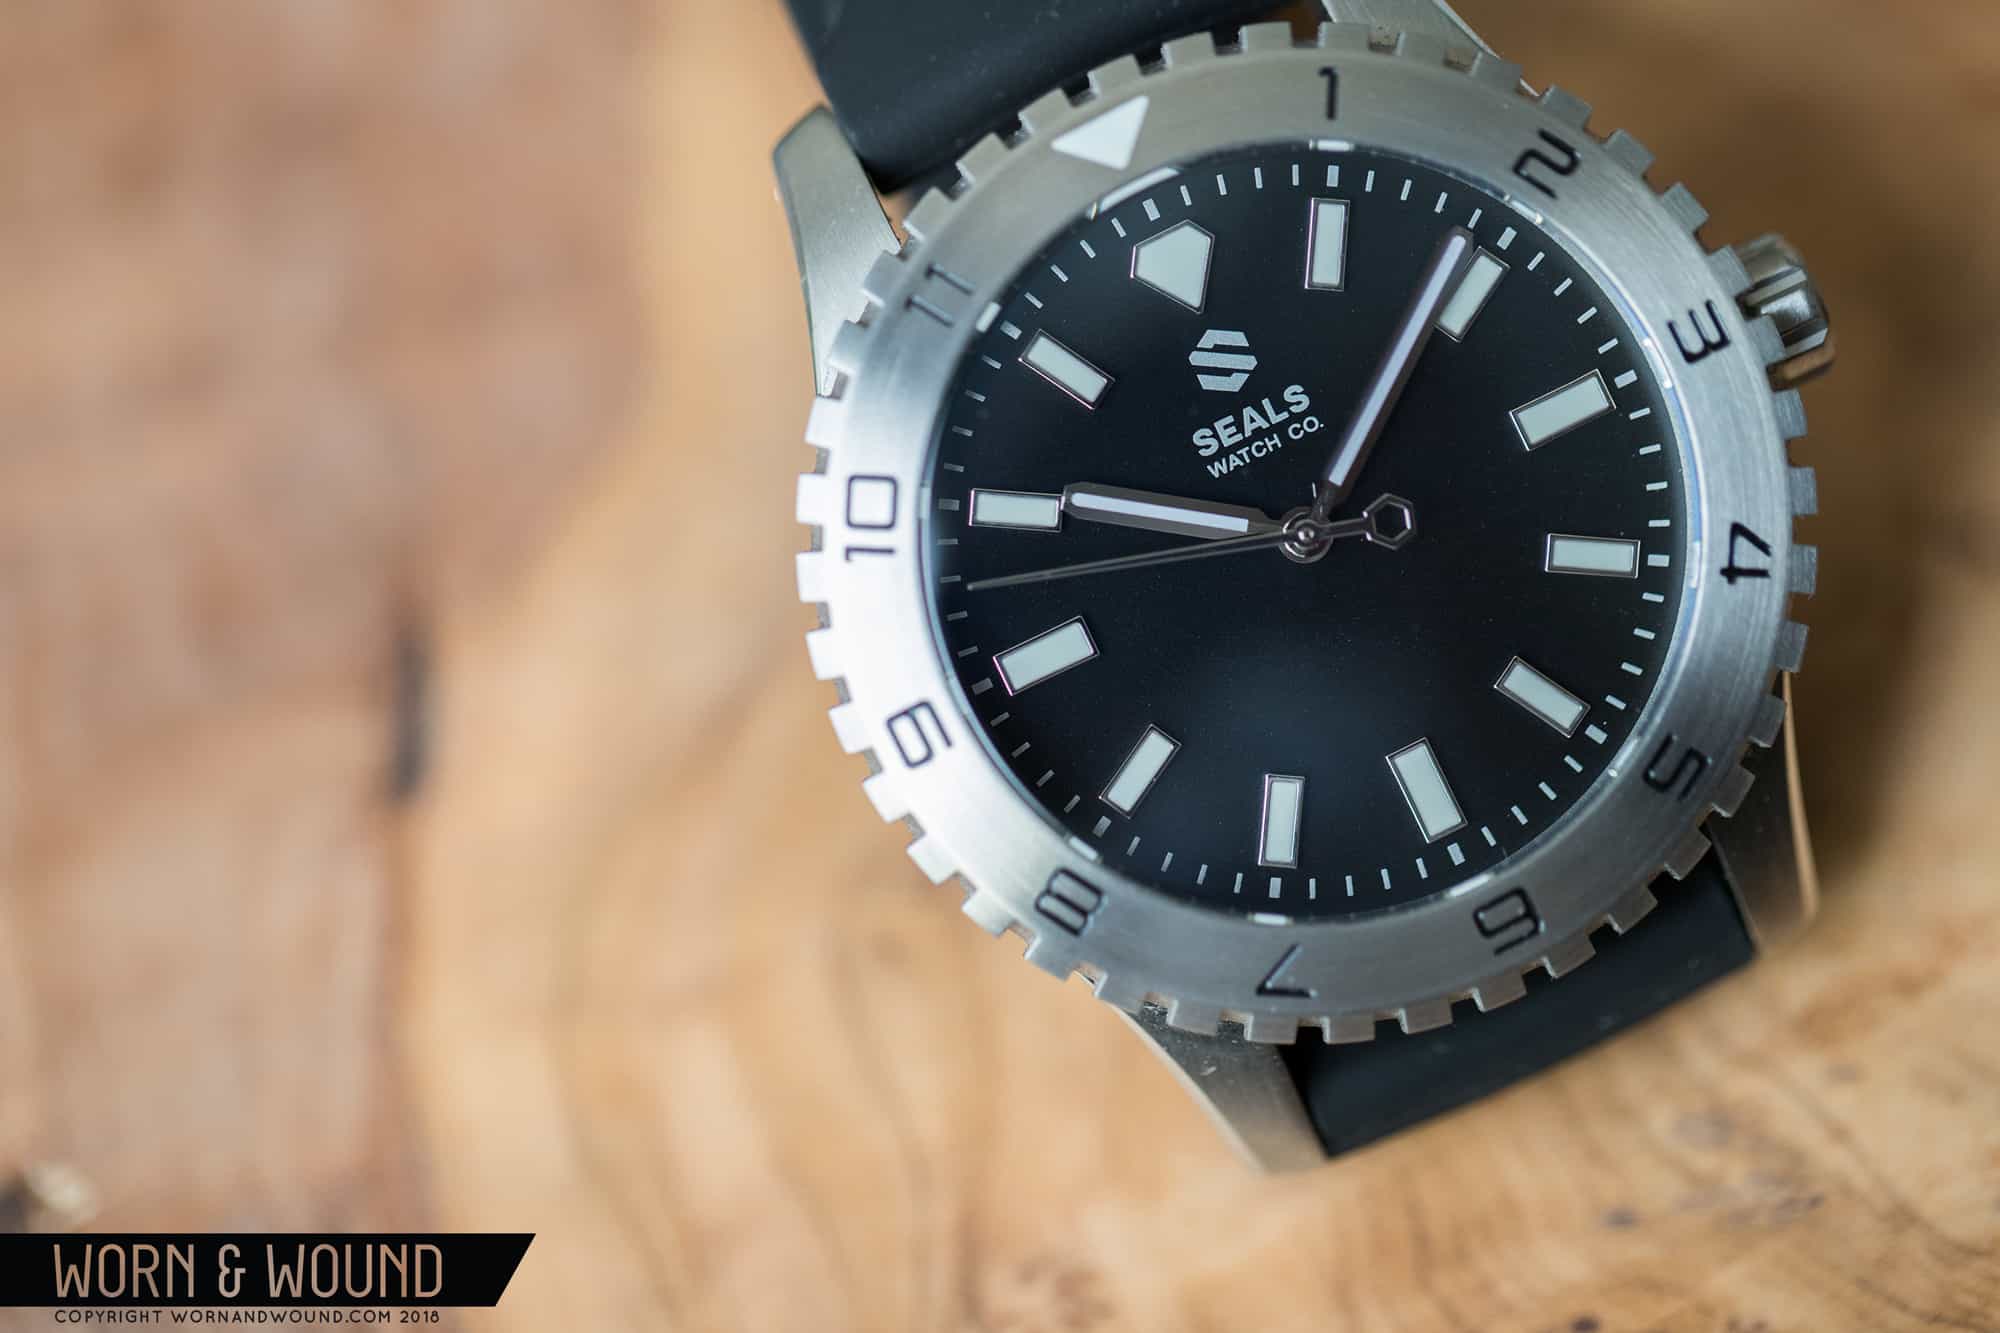 First Look: Dark Seal from Seals Watch Co.